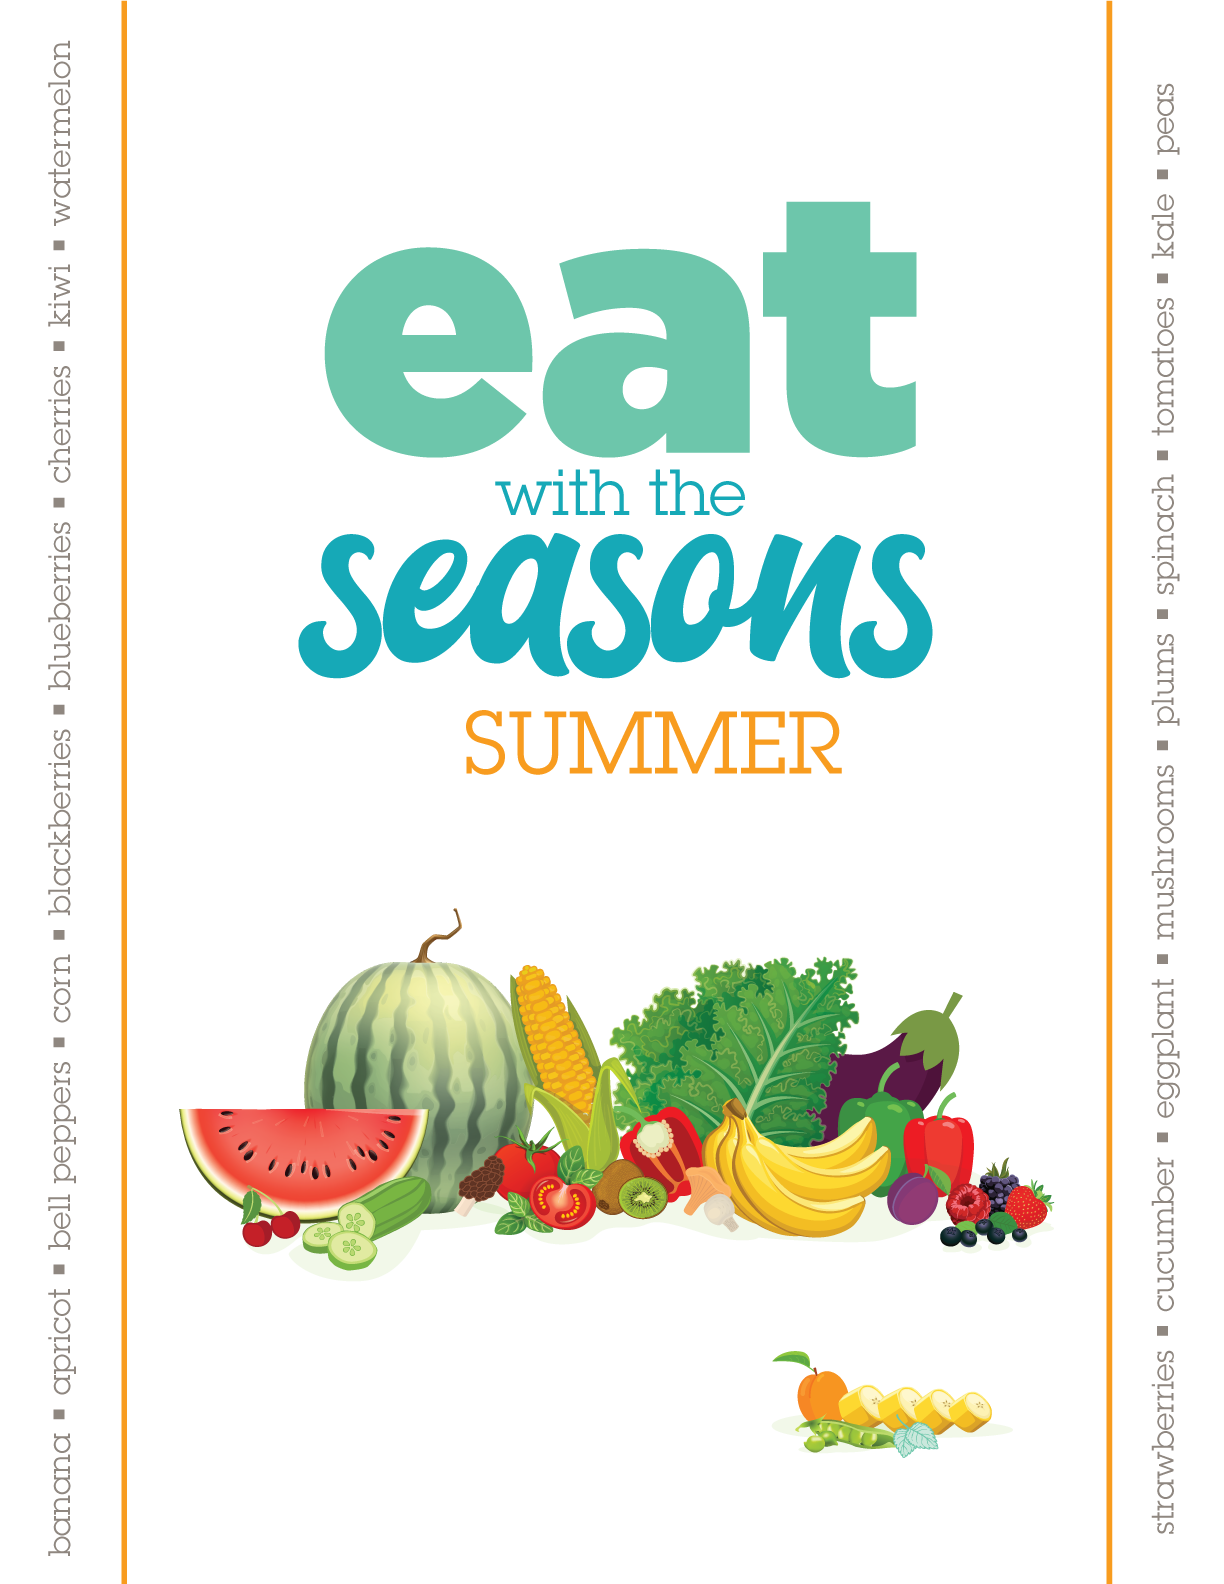 3 Eat-with-the-Seasons-Summer--VERTICAL.png